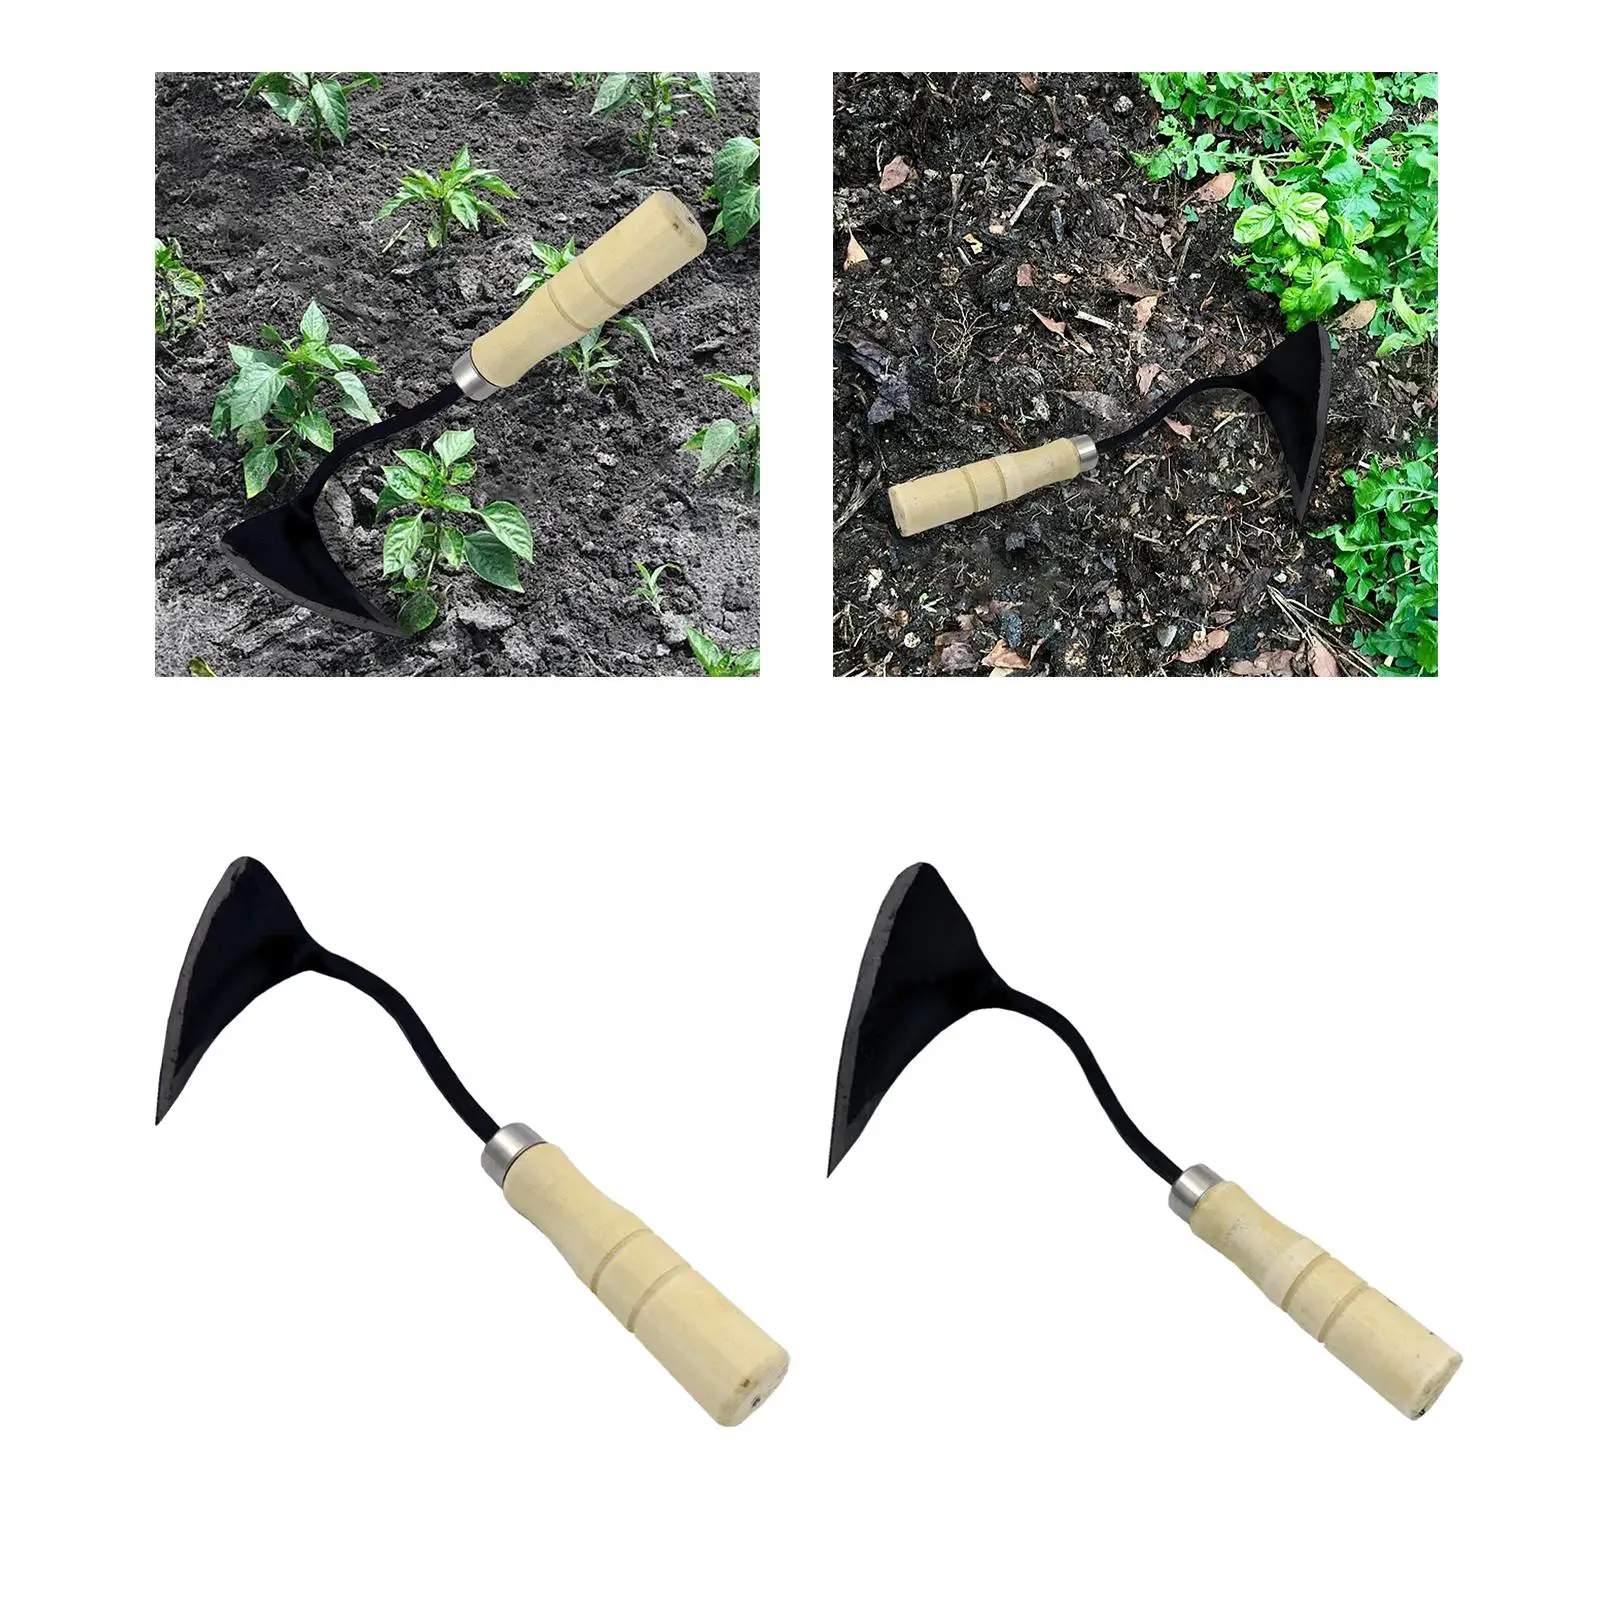 Gardening Plow Hoe Portable Save Labor Sharp Weeds Removal Tool Sharp Wide Blade for Yard Kids and Adults Vegetable Lawn